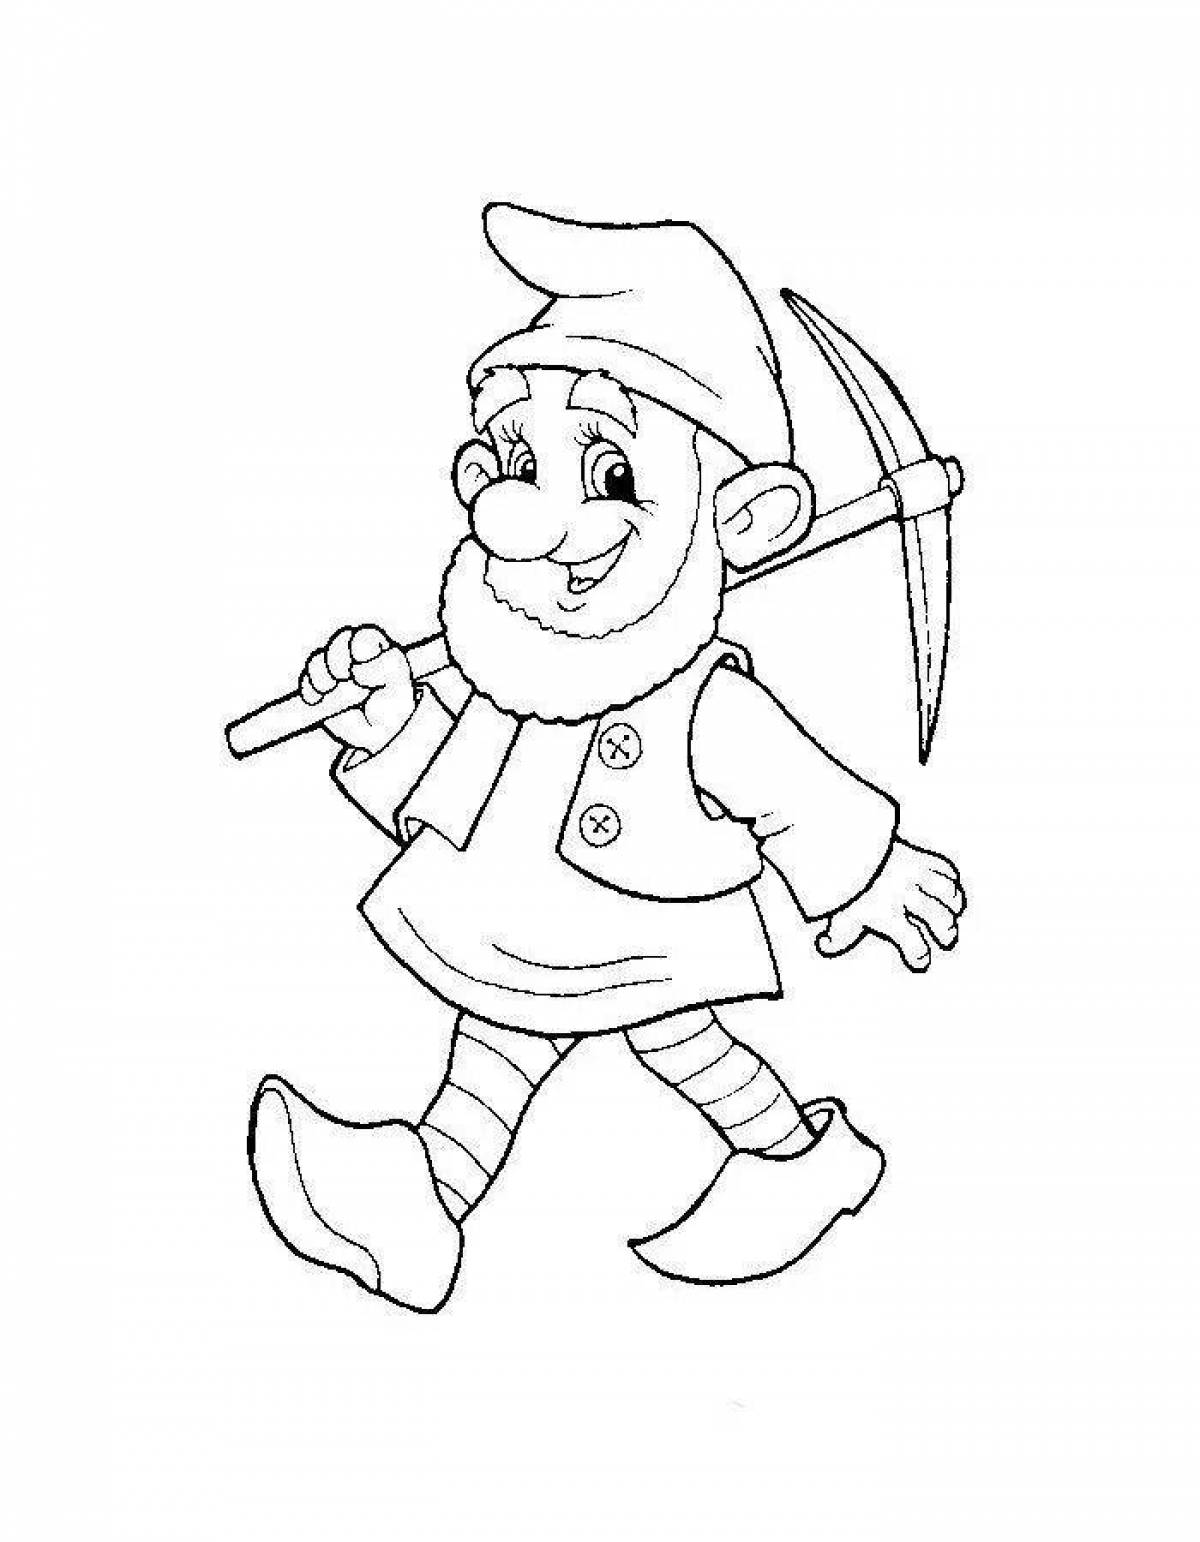 Glamorous gnome coloring page